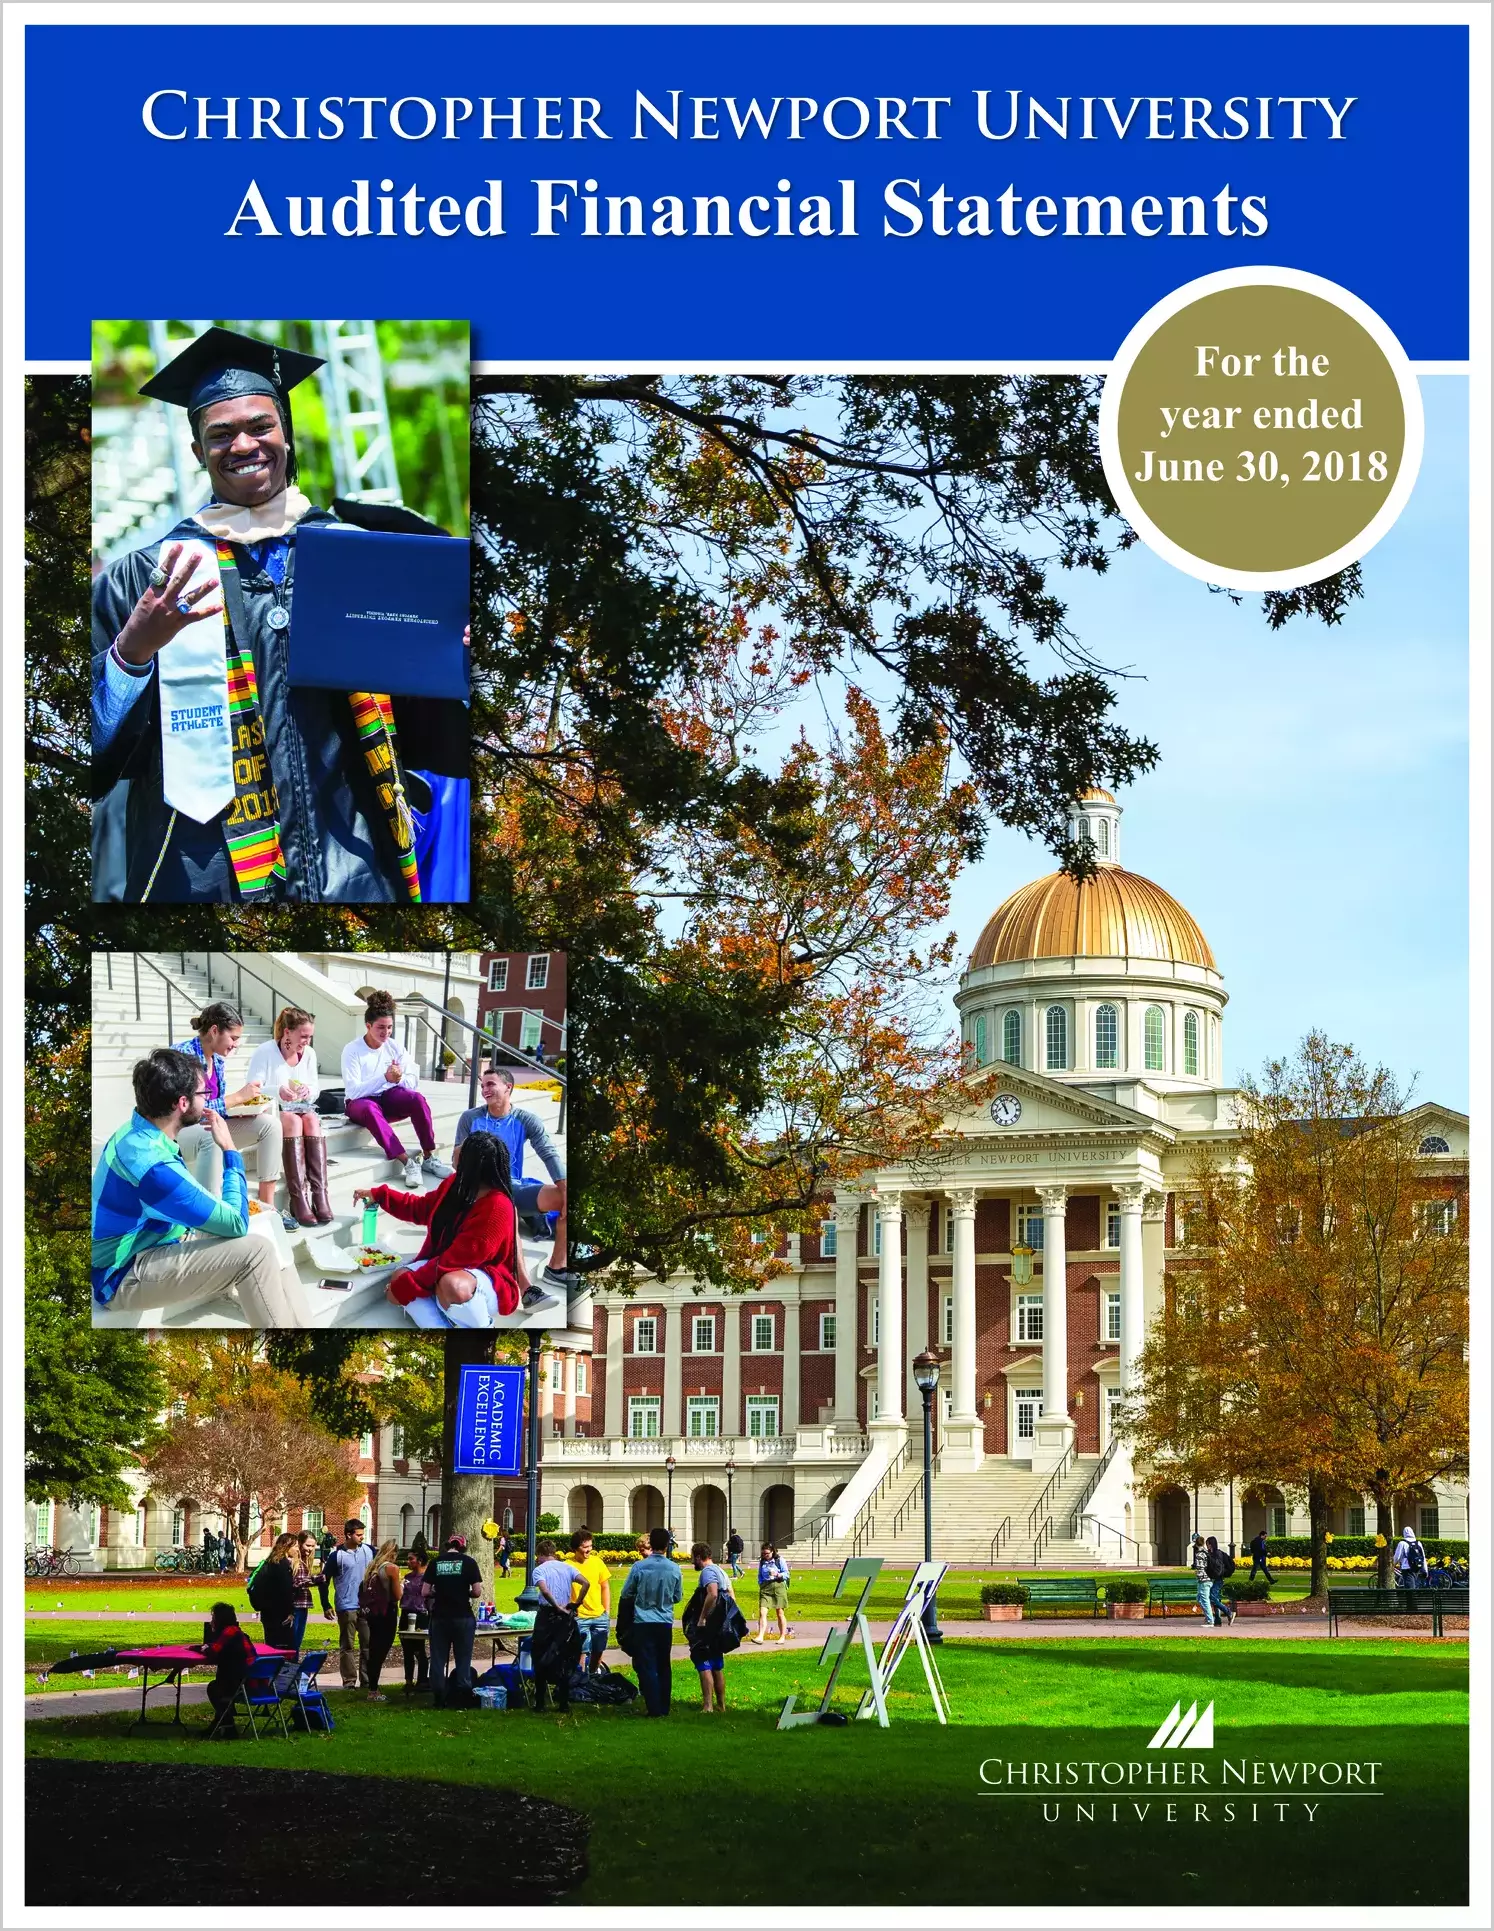 Christopher Newport University Financial Statements for the year ended June 30, 2018